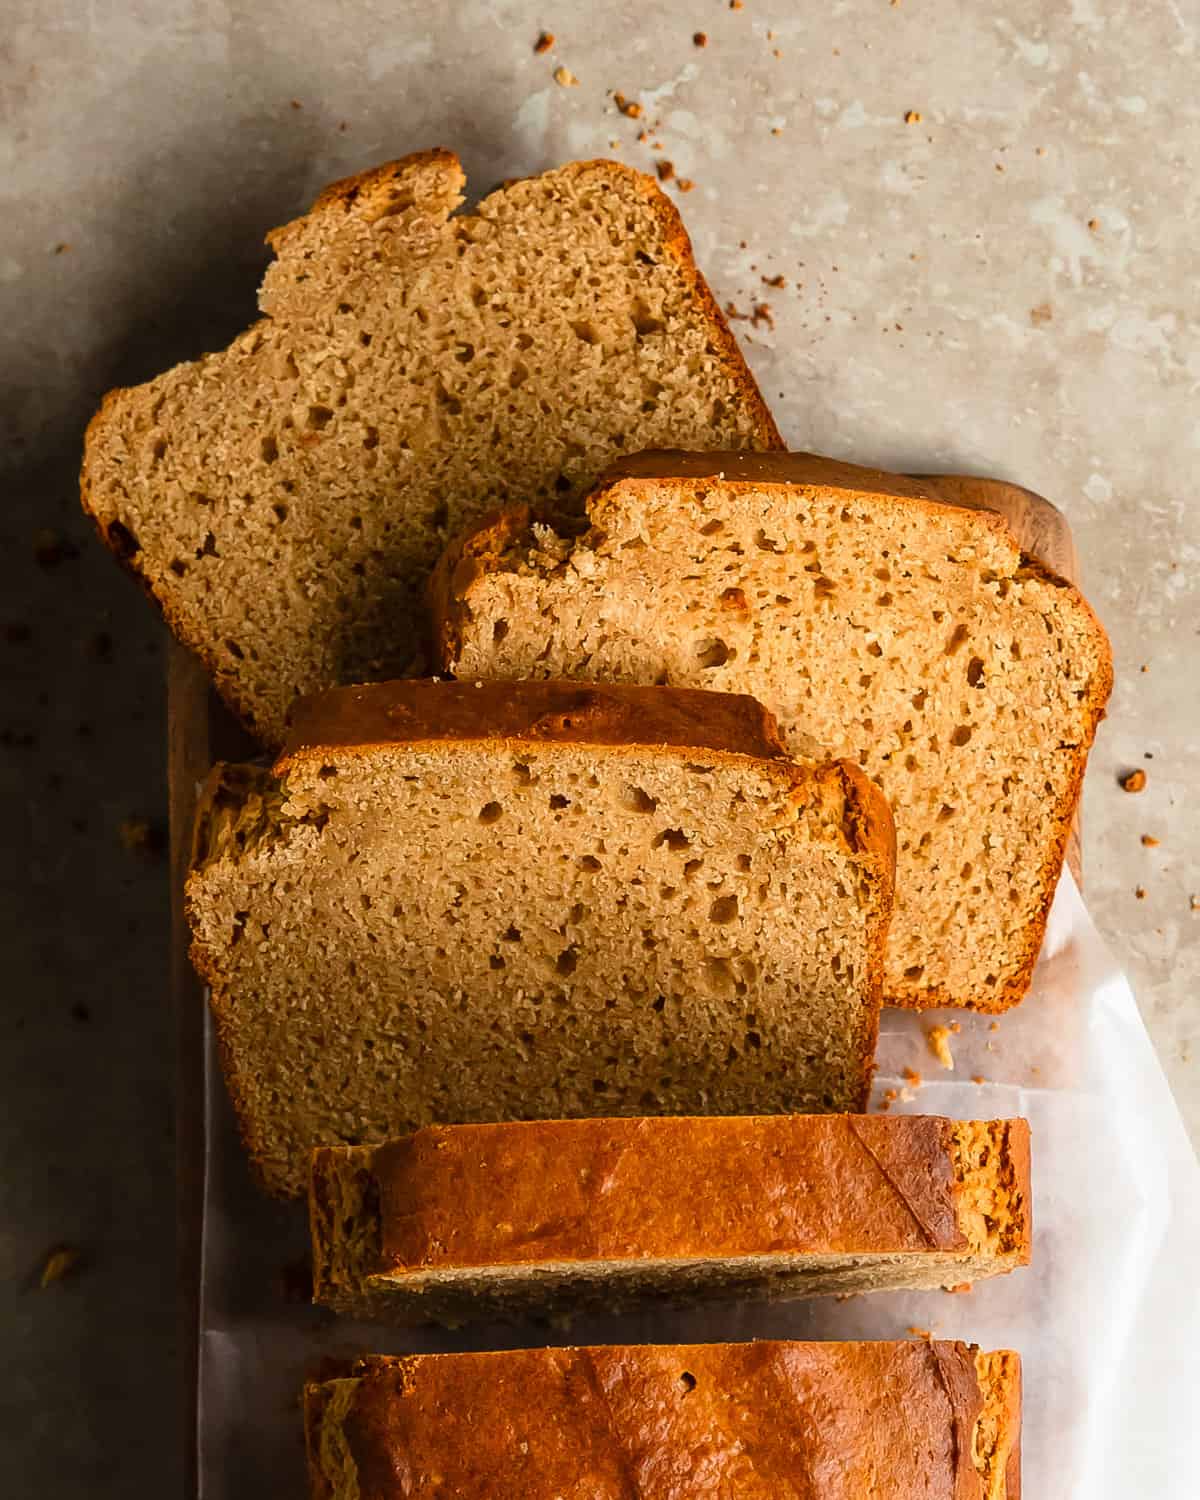 Peanut butter bread is an easy to make peanut butter quick bread with a soft, moist and nutty interior and a wonderfully toasted exterior. This peanut butter bread recipe is inspired by the simple and minimal ingredient recipes from depression era. Make this old fashioned peanut butter bread truly decadent by topping it your favorite spread such as peanut butter and honey.